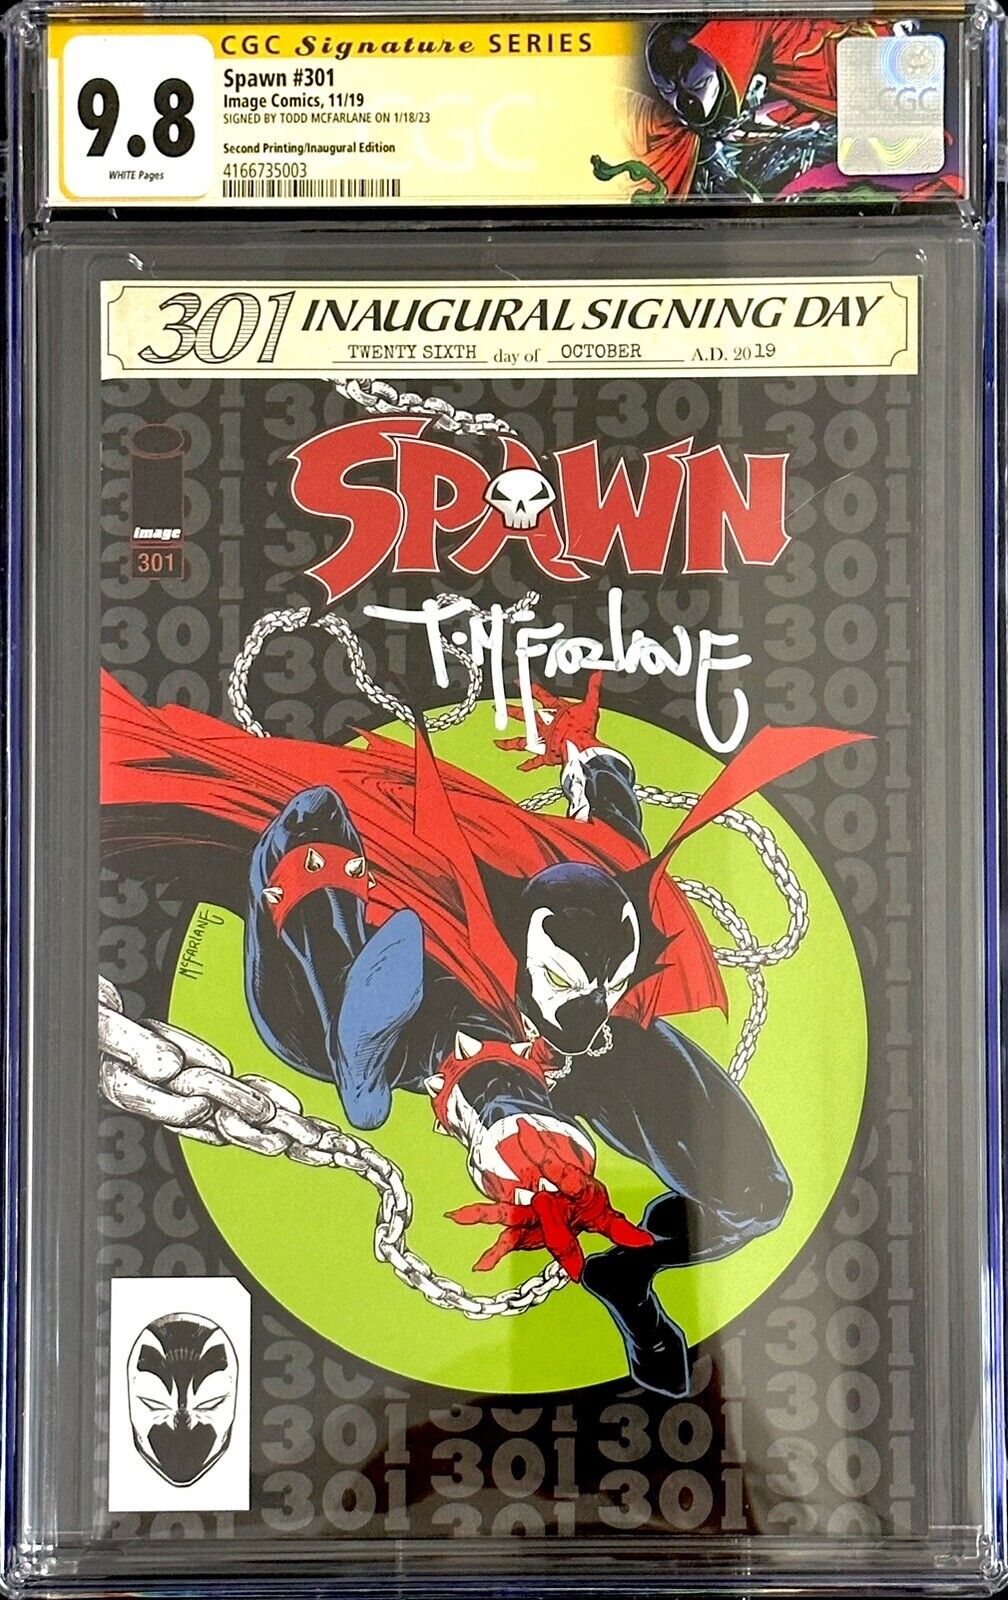 Spawn #301 Alamo Drafthouse Exclusive CGC SS 9.8 Signed Todd McFarlane LE 1000